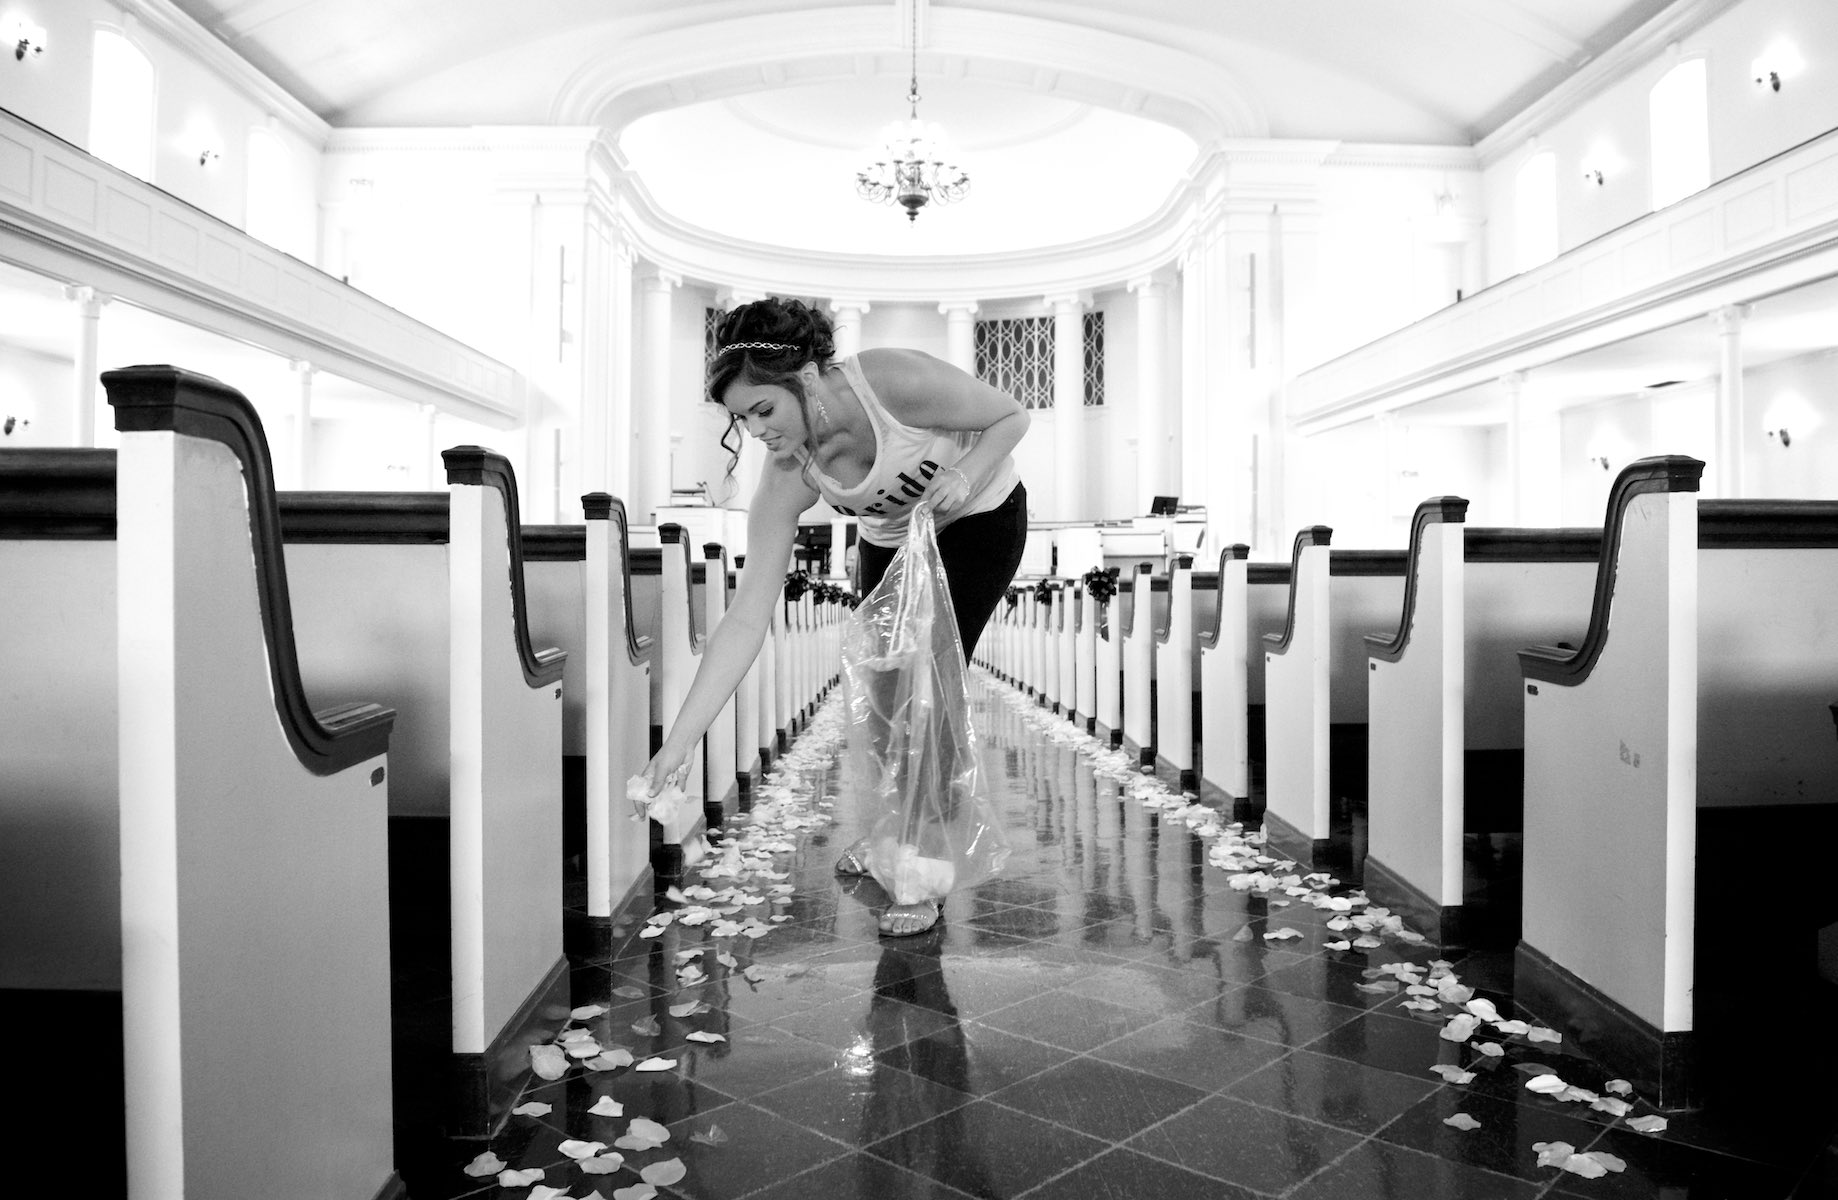 Adria sprinkles rose petals down the center aisle of MacMurray College's Annie Merner Chapel as she prepares for her wedding ceremony. Wedding photography by Steve & Tiffany Warmowski.